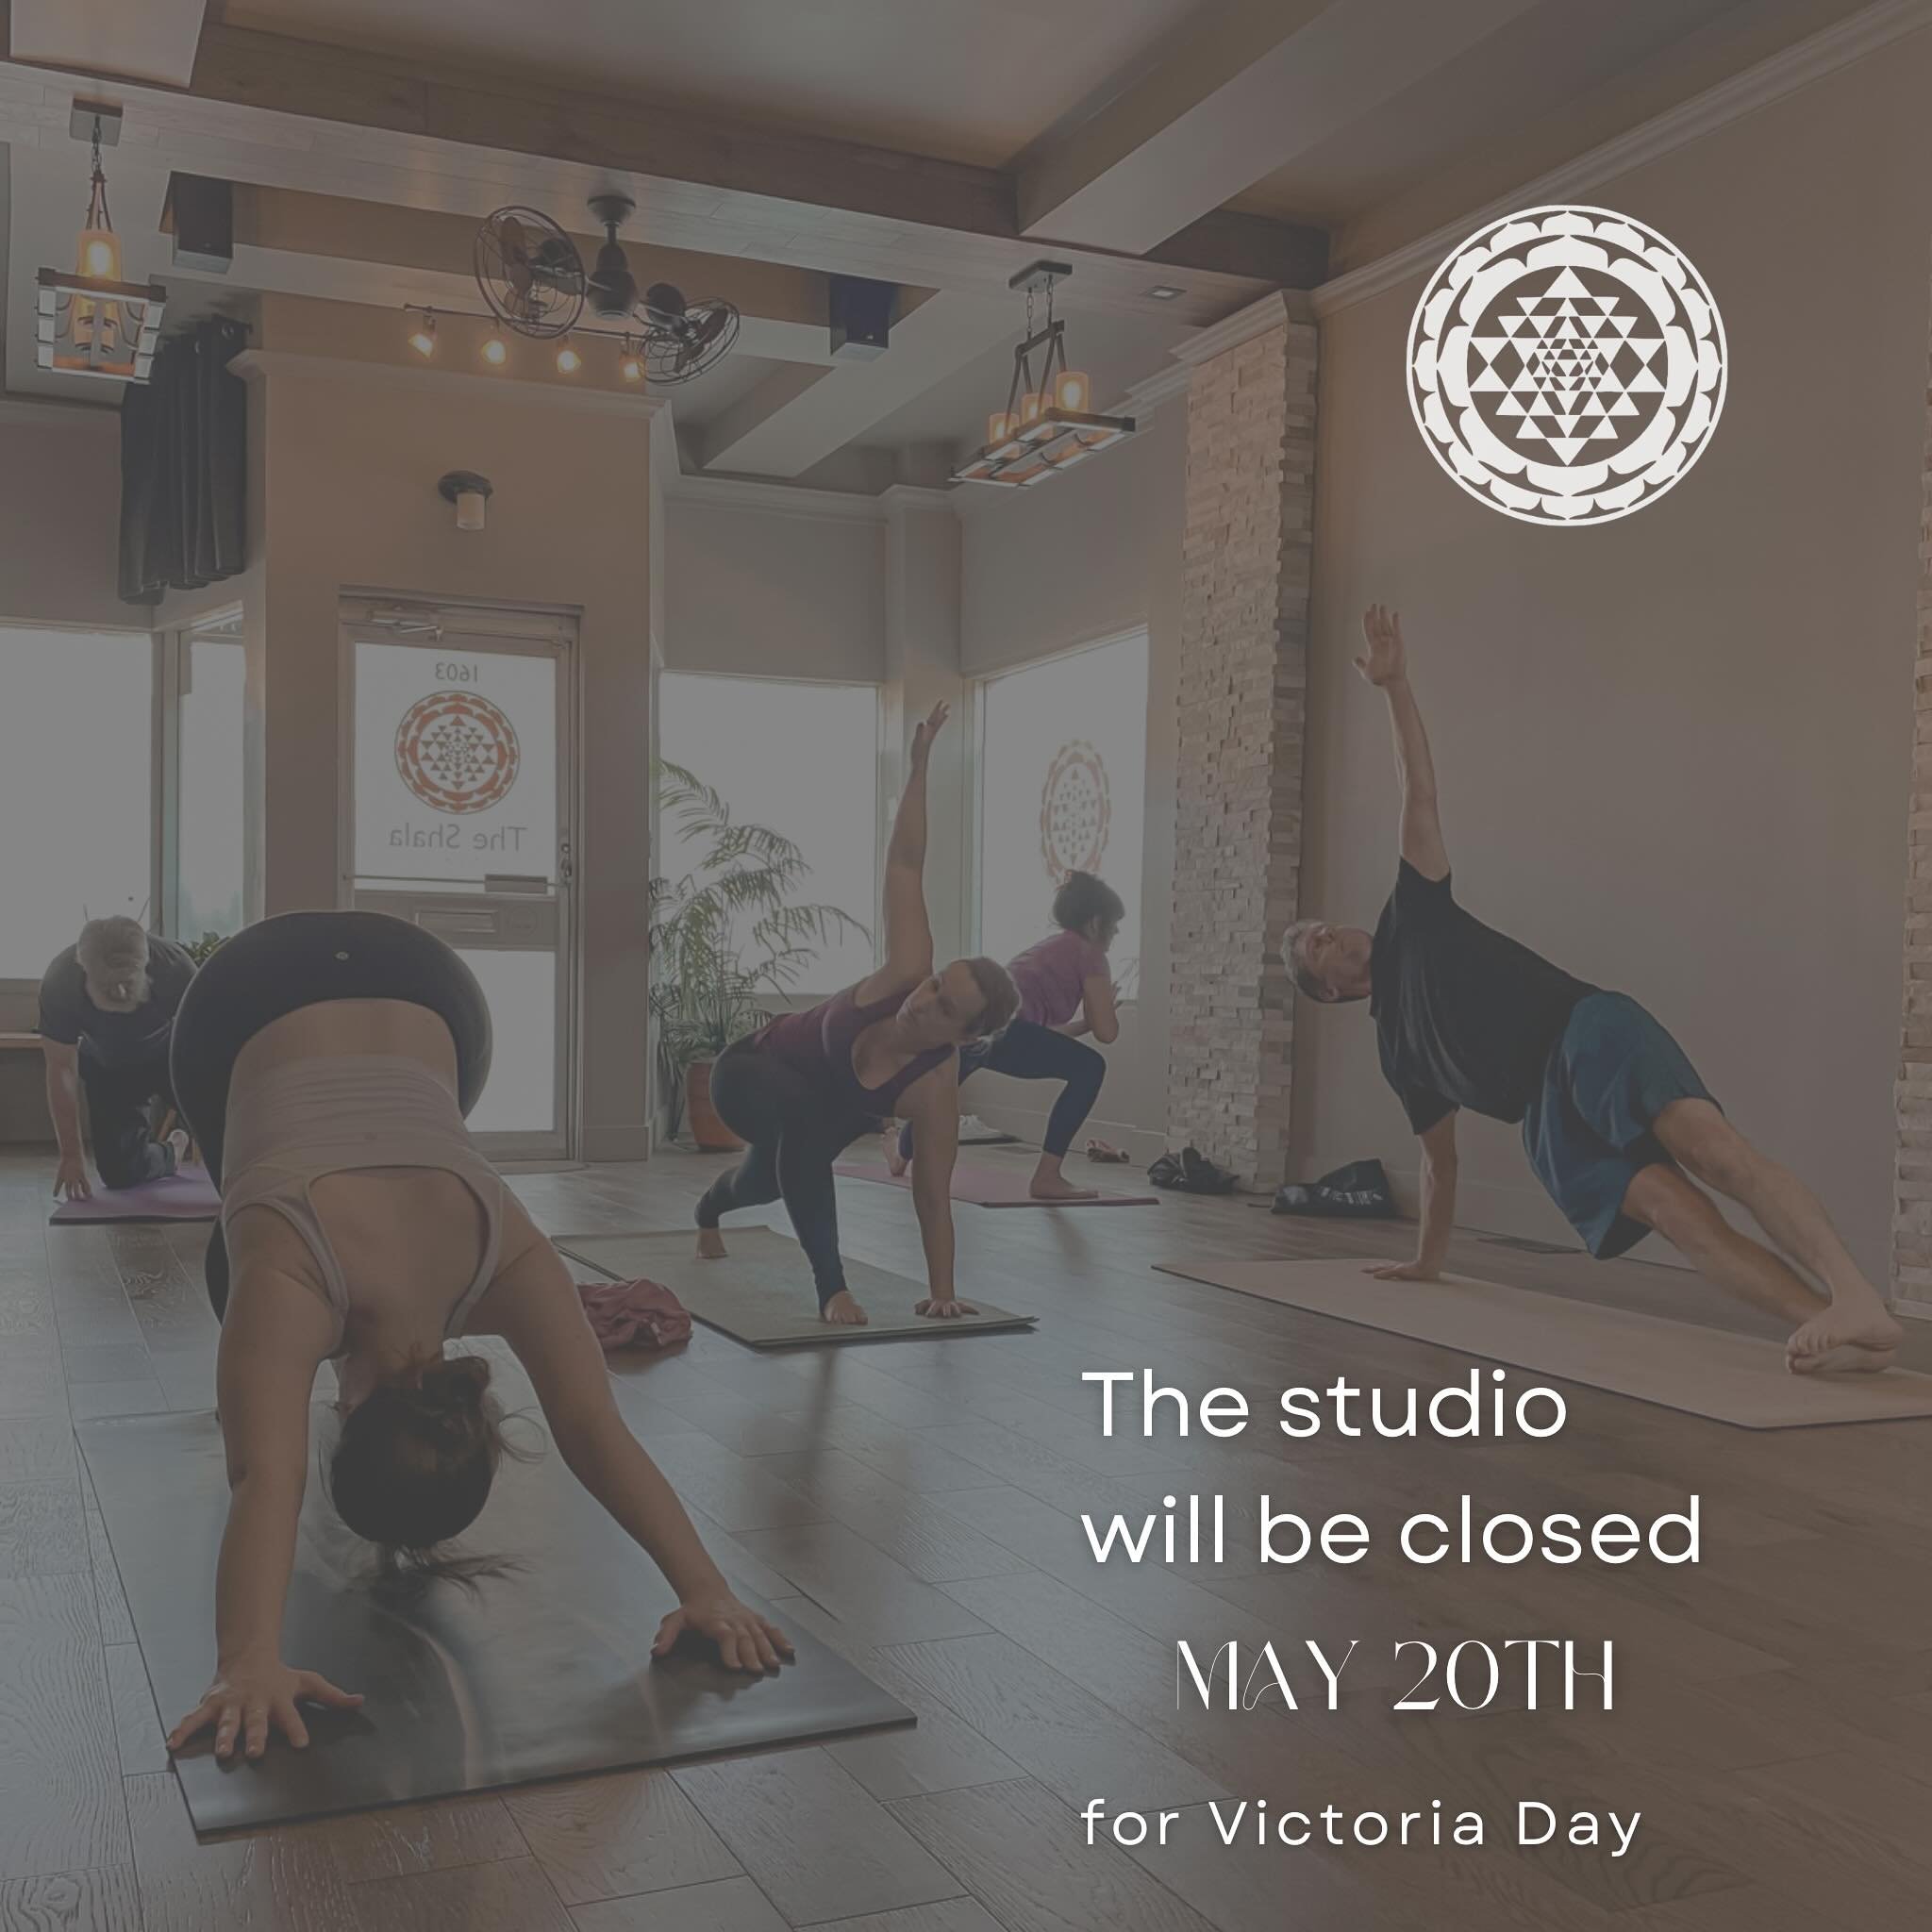 We&rsquo;ll be open Friday, Saturday, and Sunday for regularly scheduled classes, and closed on Monday for the Victoria Day holiday. Enjoy the beautiful weather this weekend and &ldquo;take rest&rdquo; 🧡 #savasana